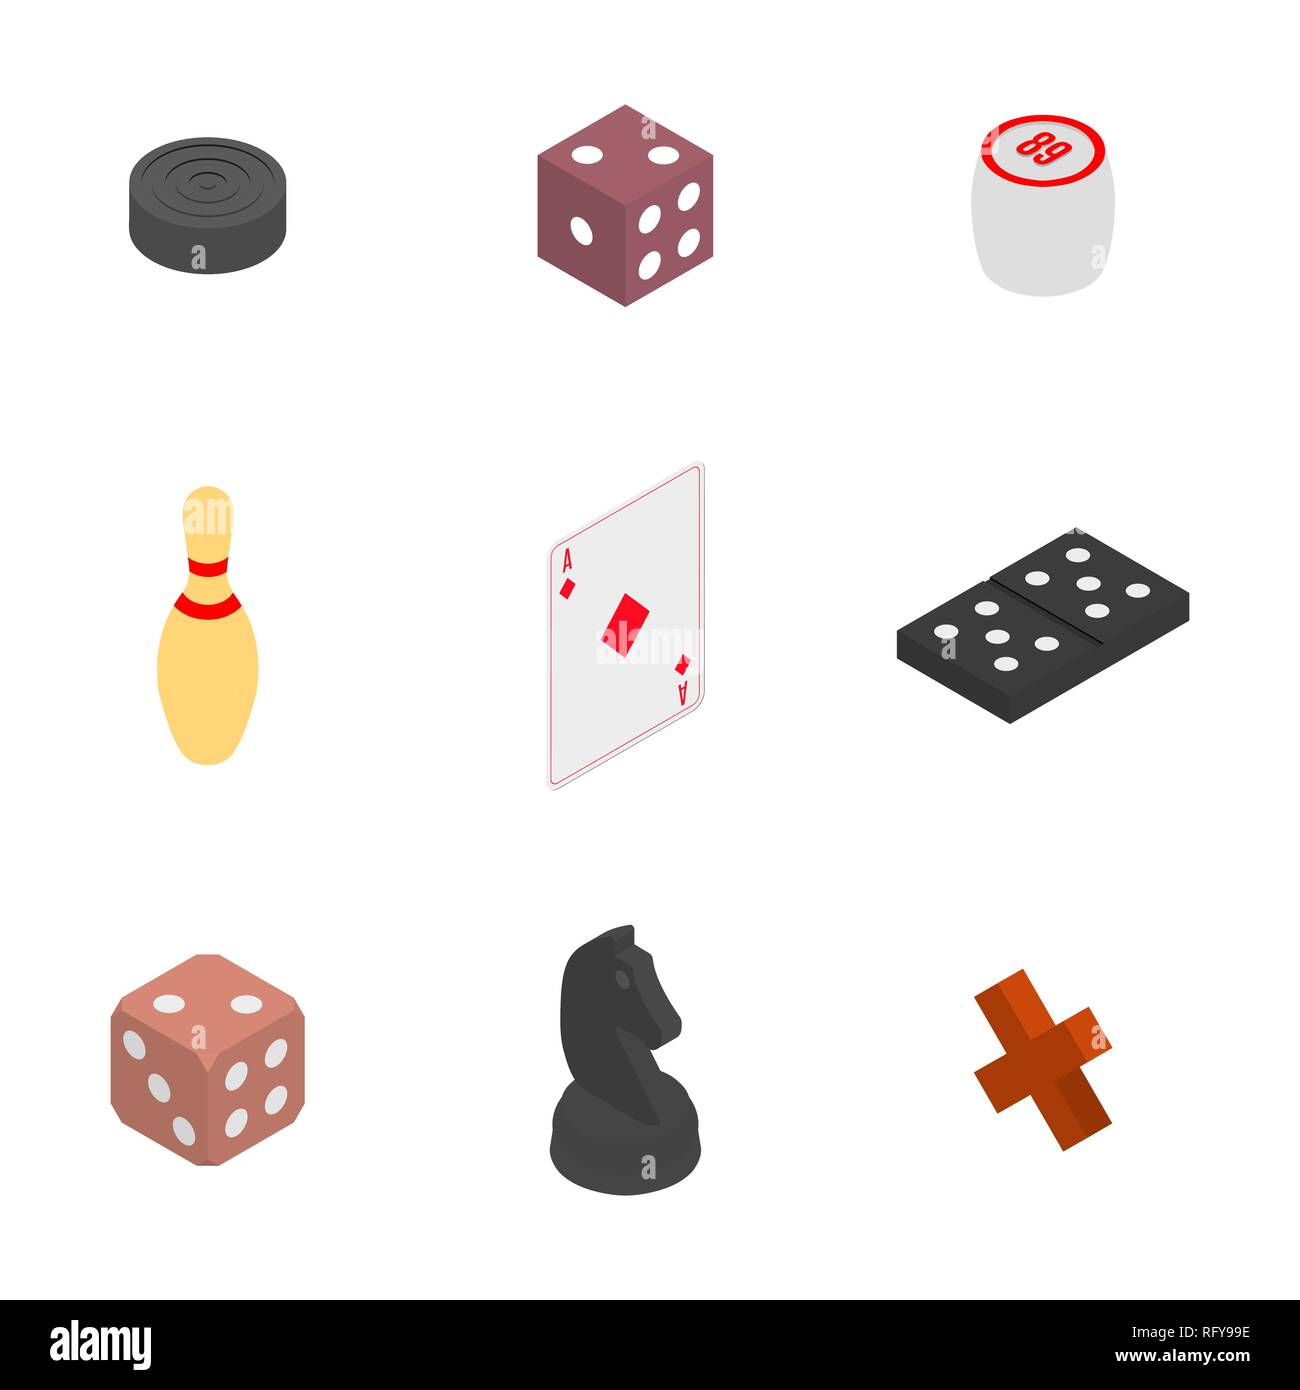 Set of game icons. Items to play dominoes, chess, dice, checkers and lotto. Flat 3D isometric style, vector illustration. Stock Vector